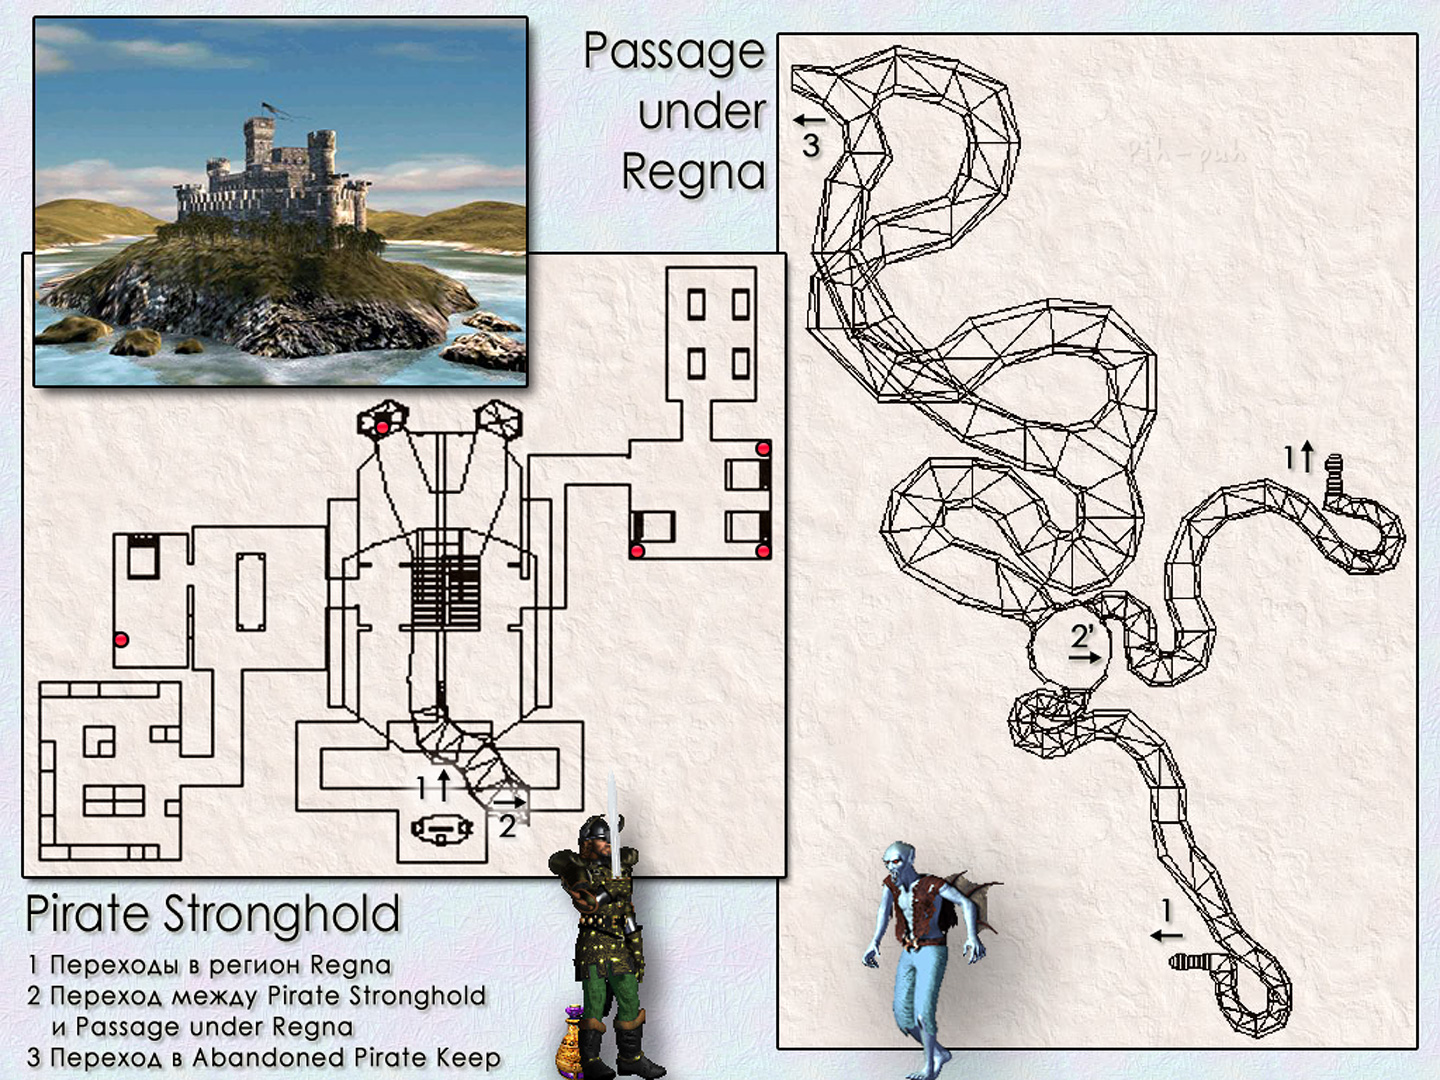 MIGHT AND MAGIC VIII. .  Pirate Stronghold  Passage under Regna.